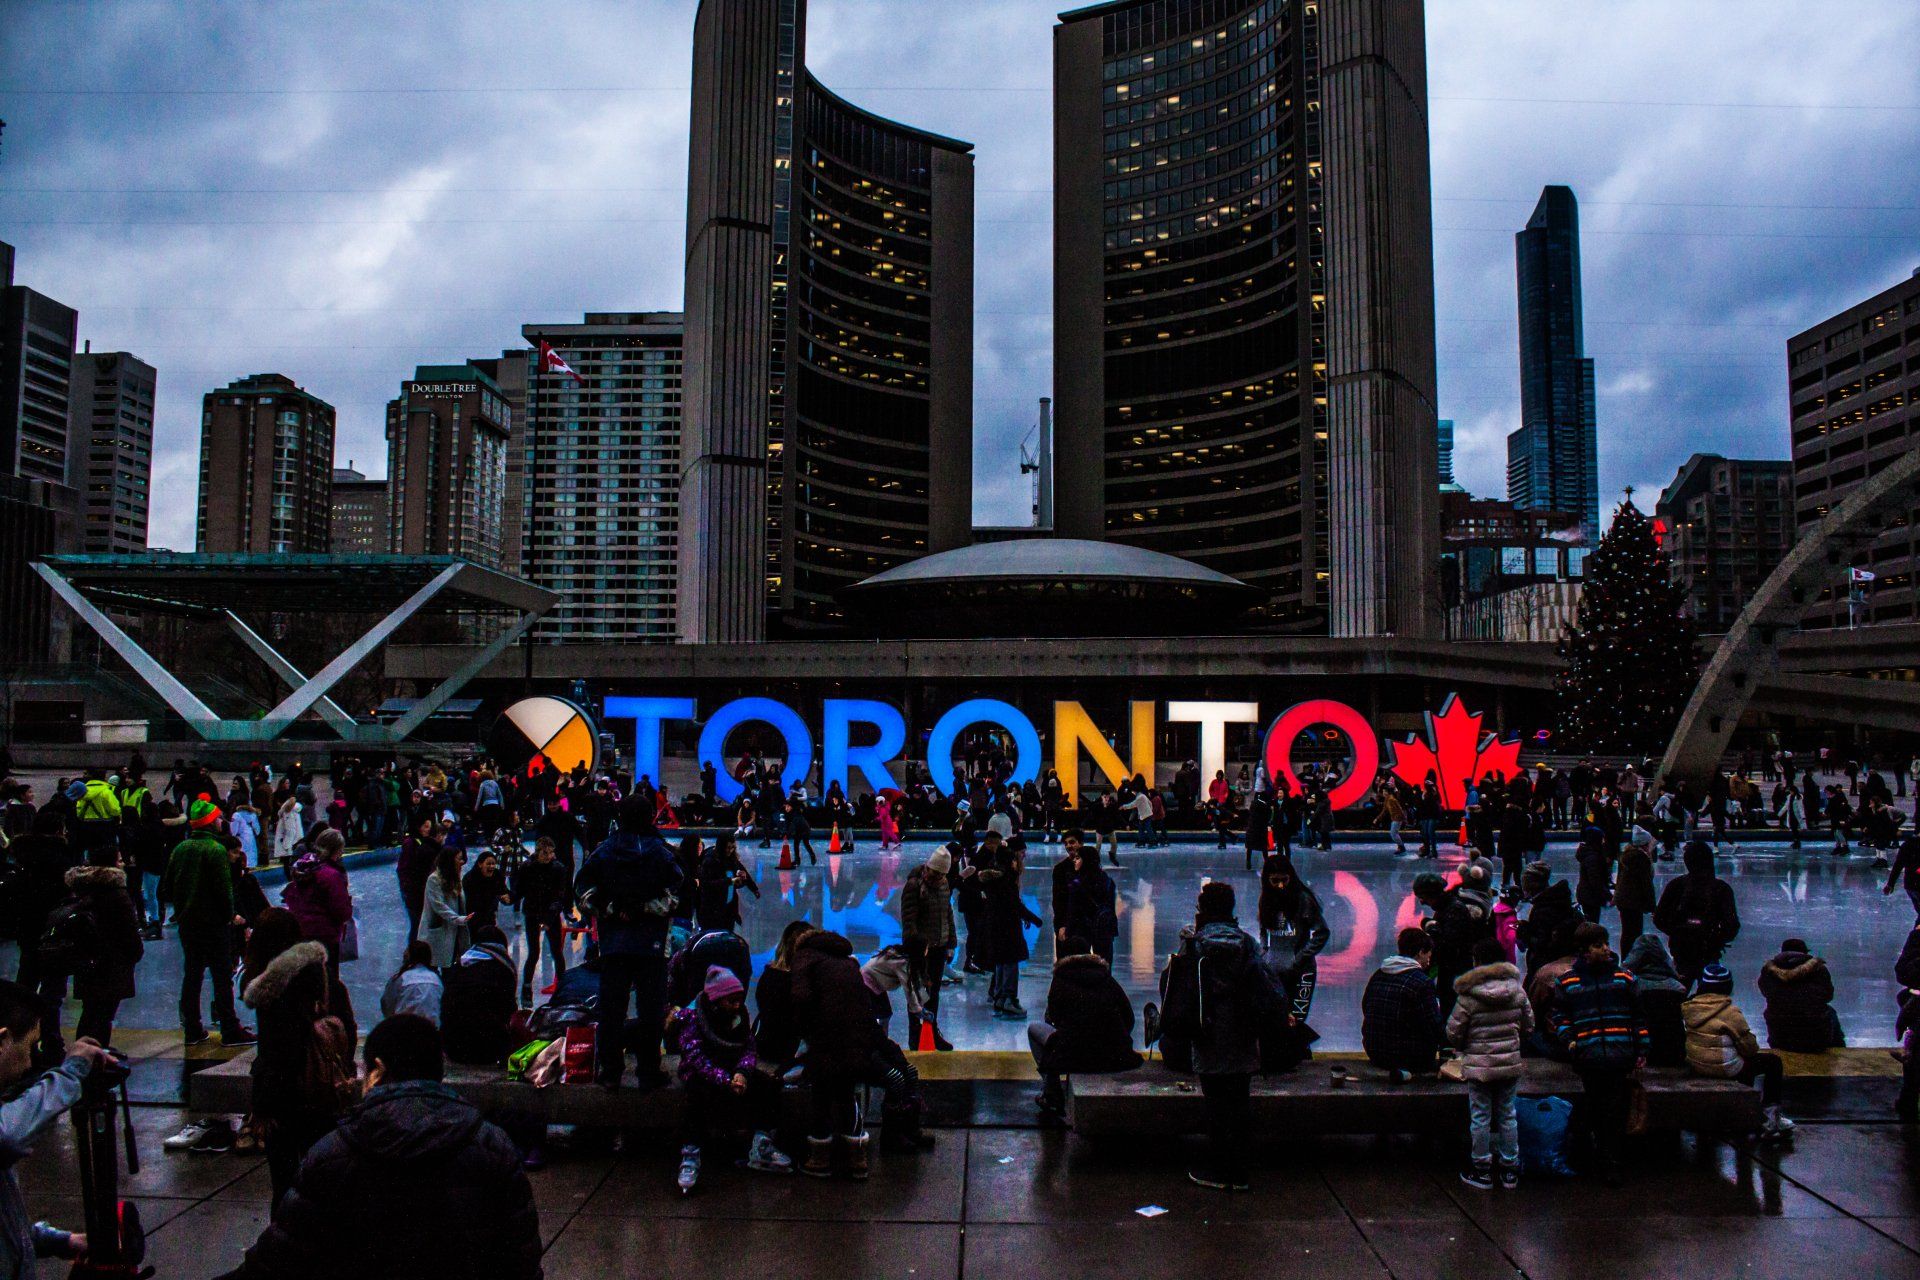 A crowd of people are gathered in front of a sign that says toronto.